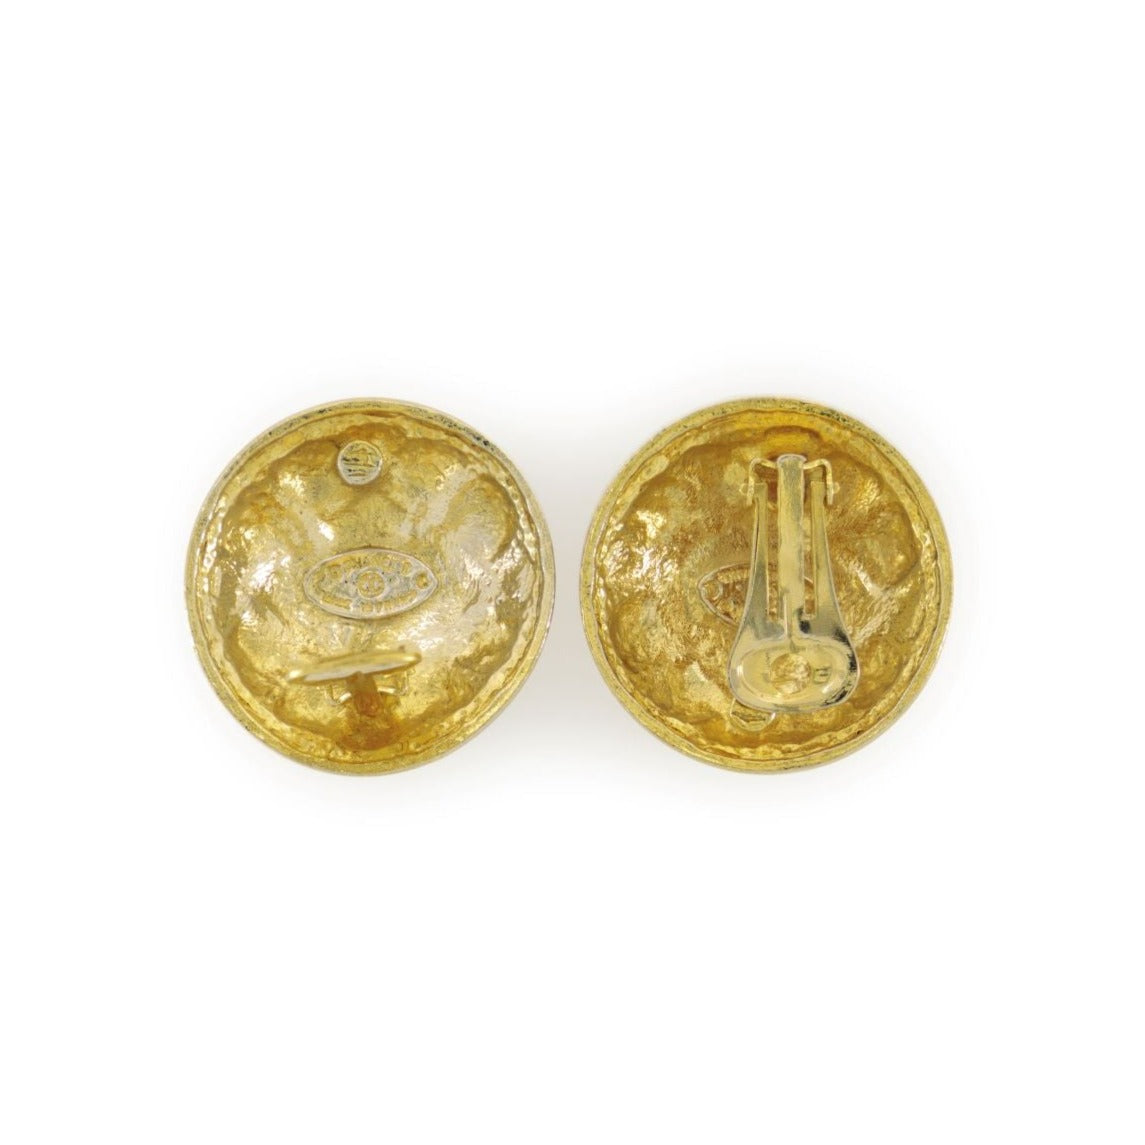  Vintage quilted button Chanel earrings hallmark side 